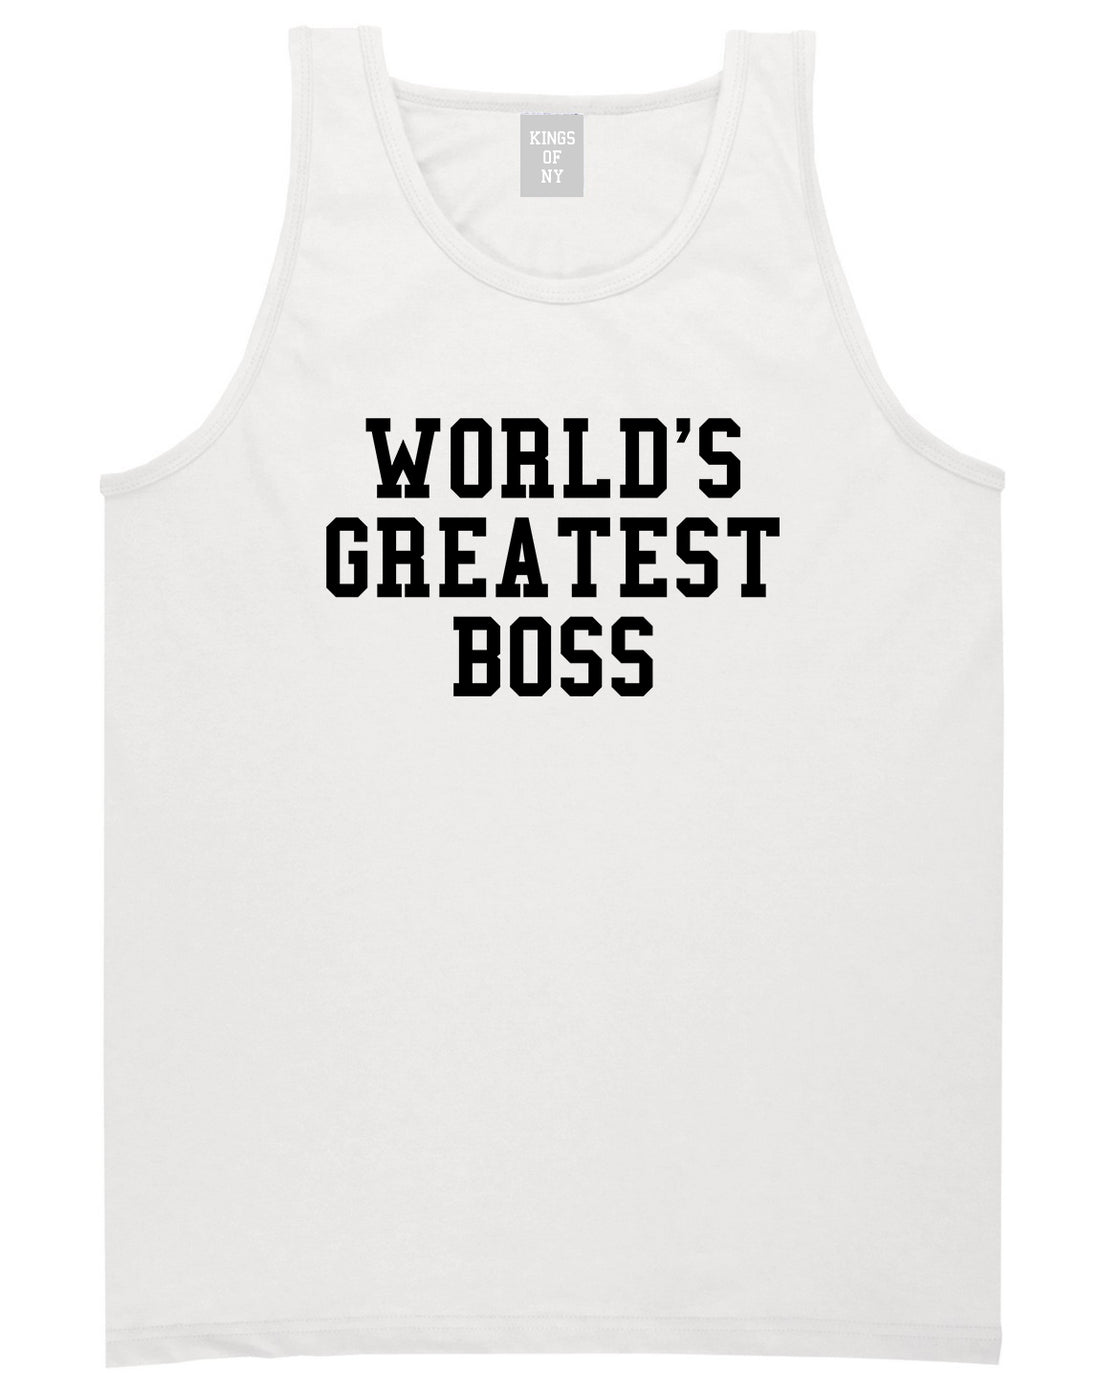 Worlds Greatest Boss Funny Christmas Mens Tank Top T-Shirt White